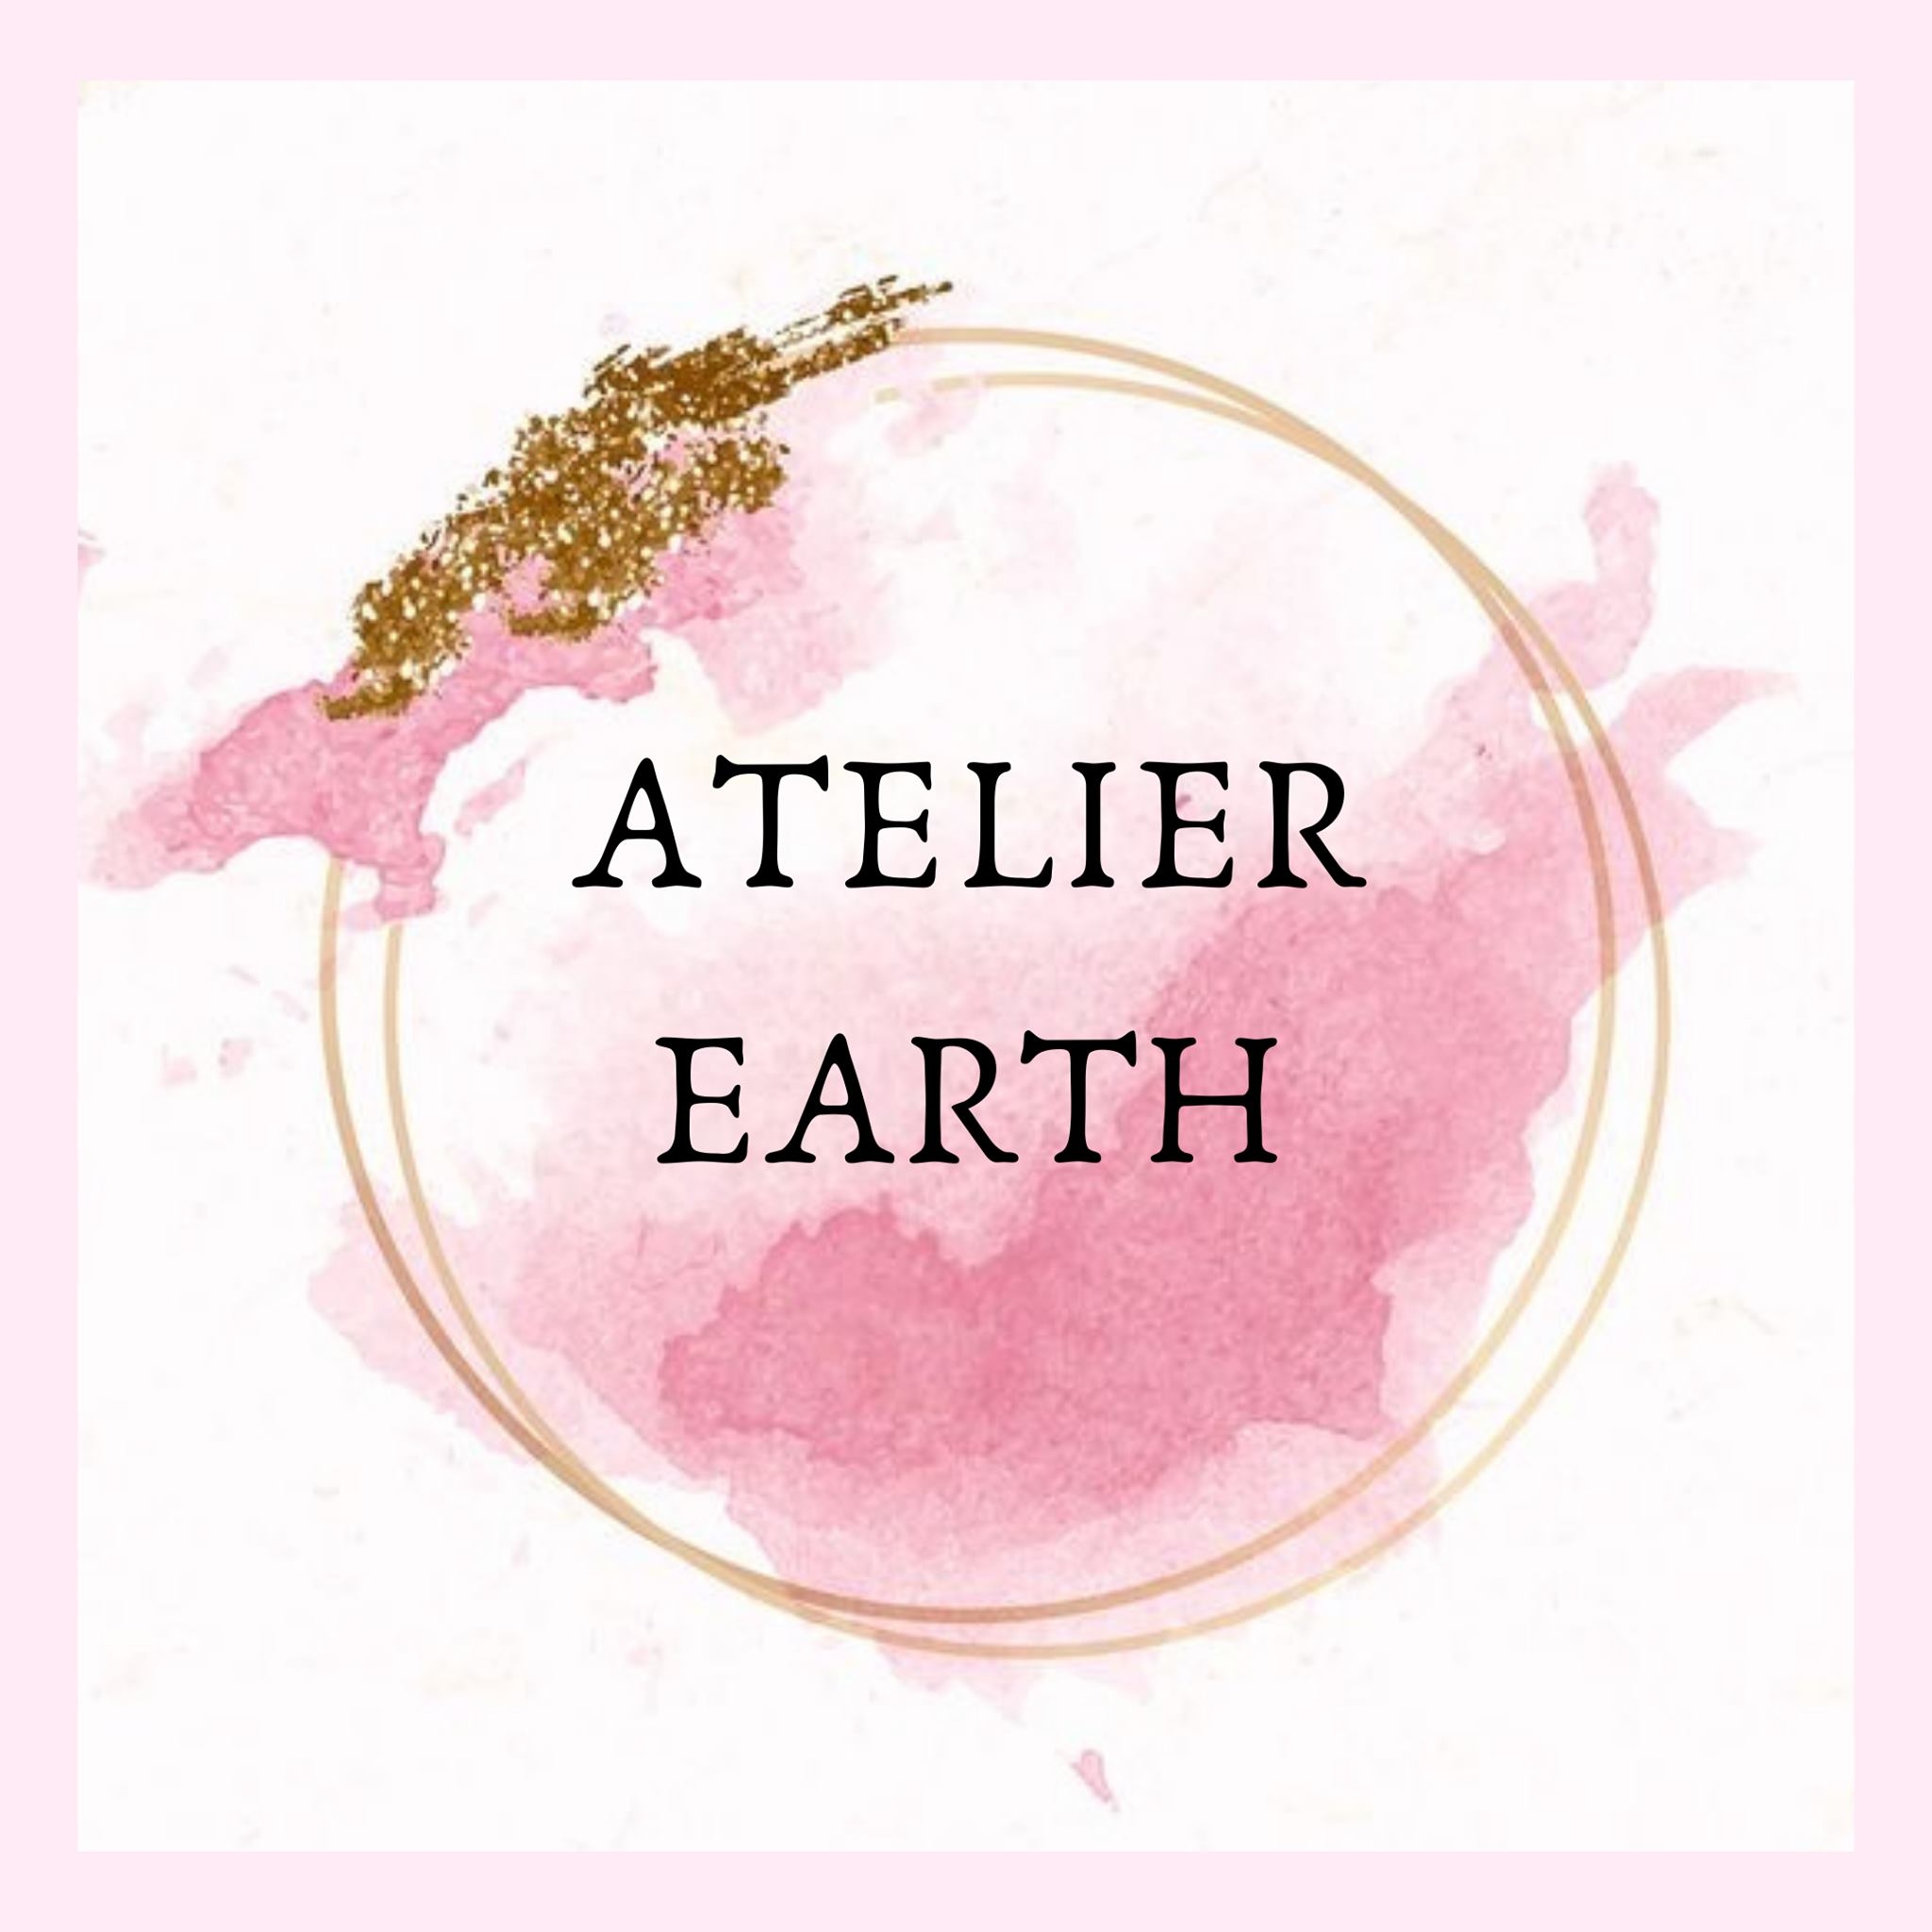 Atelier Earth|Architect|Professional Services